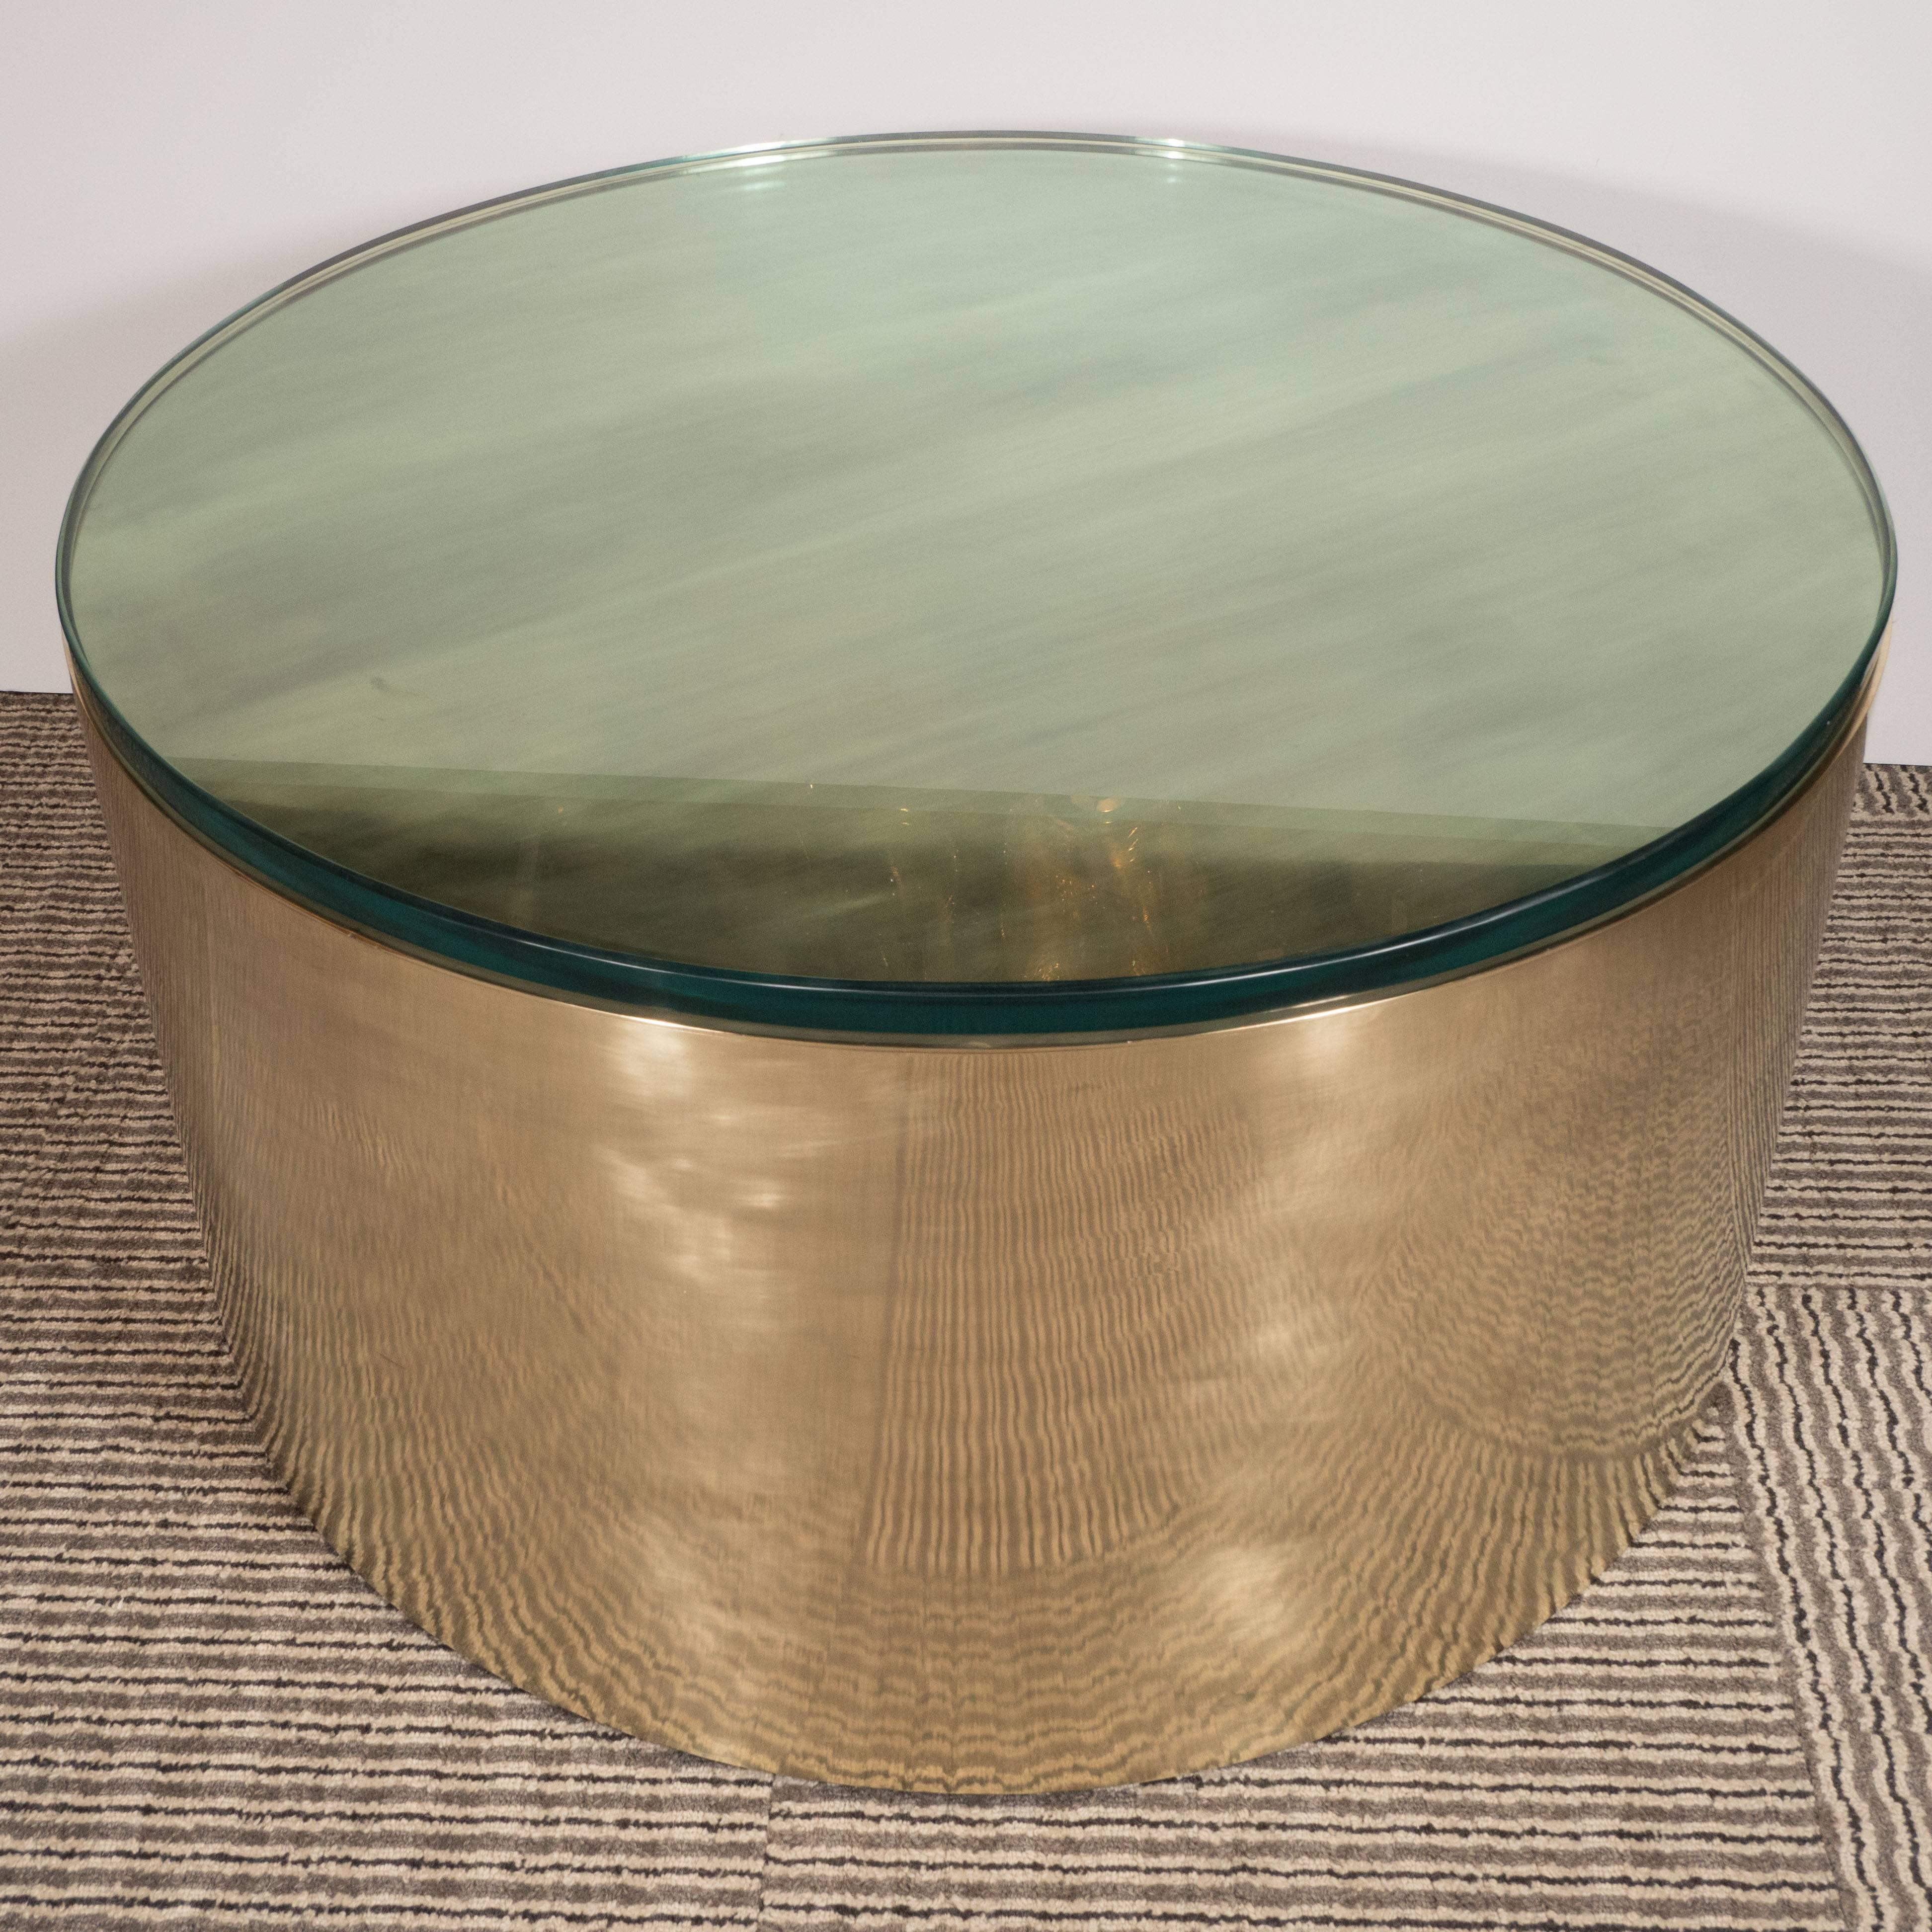 This stunning cocktail table was designed by Noel Jeffrey and custom fabricated, by hand, in the United States, circa 1980. With its austere form and bold palette of lustrous brass, this table exemplifies American design from the period at its best.